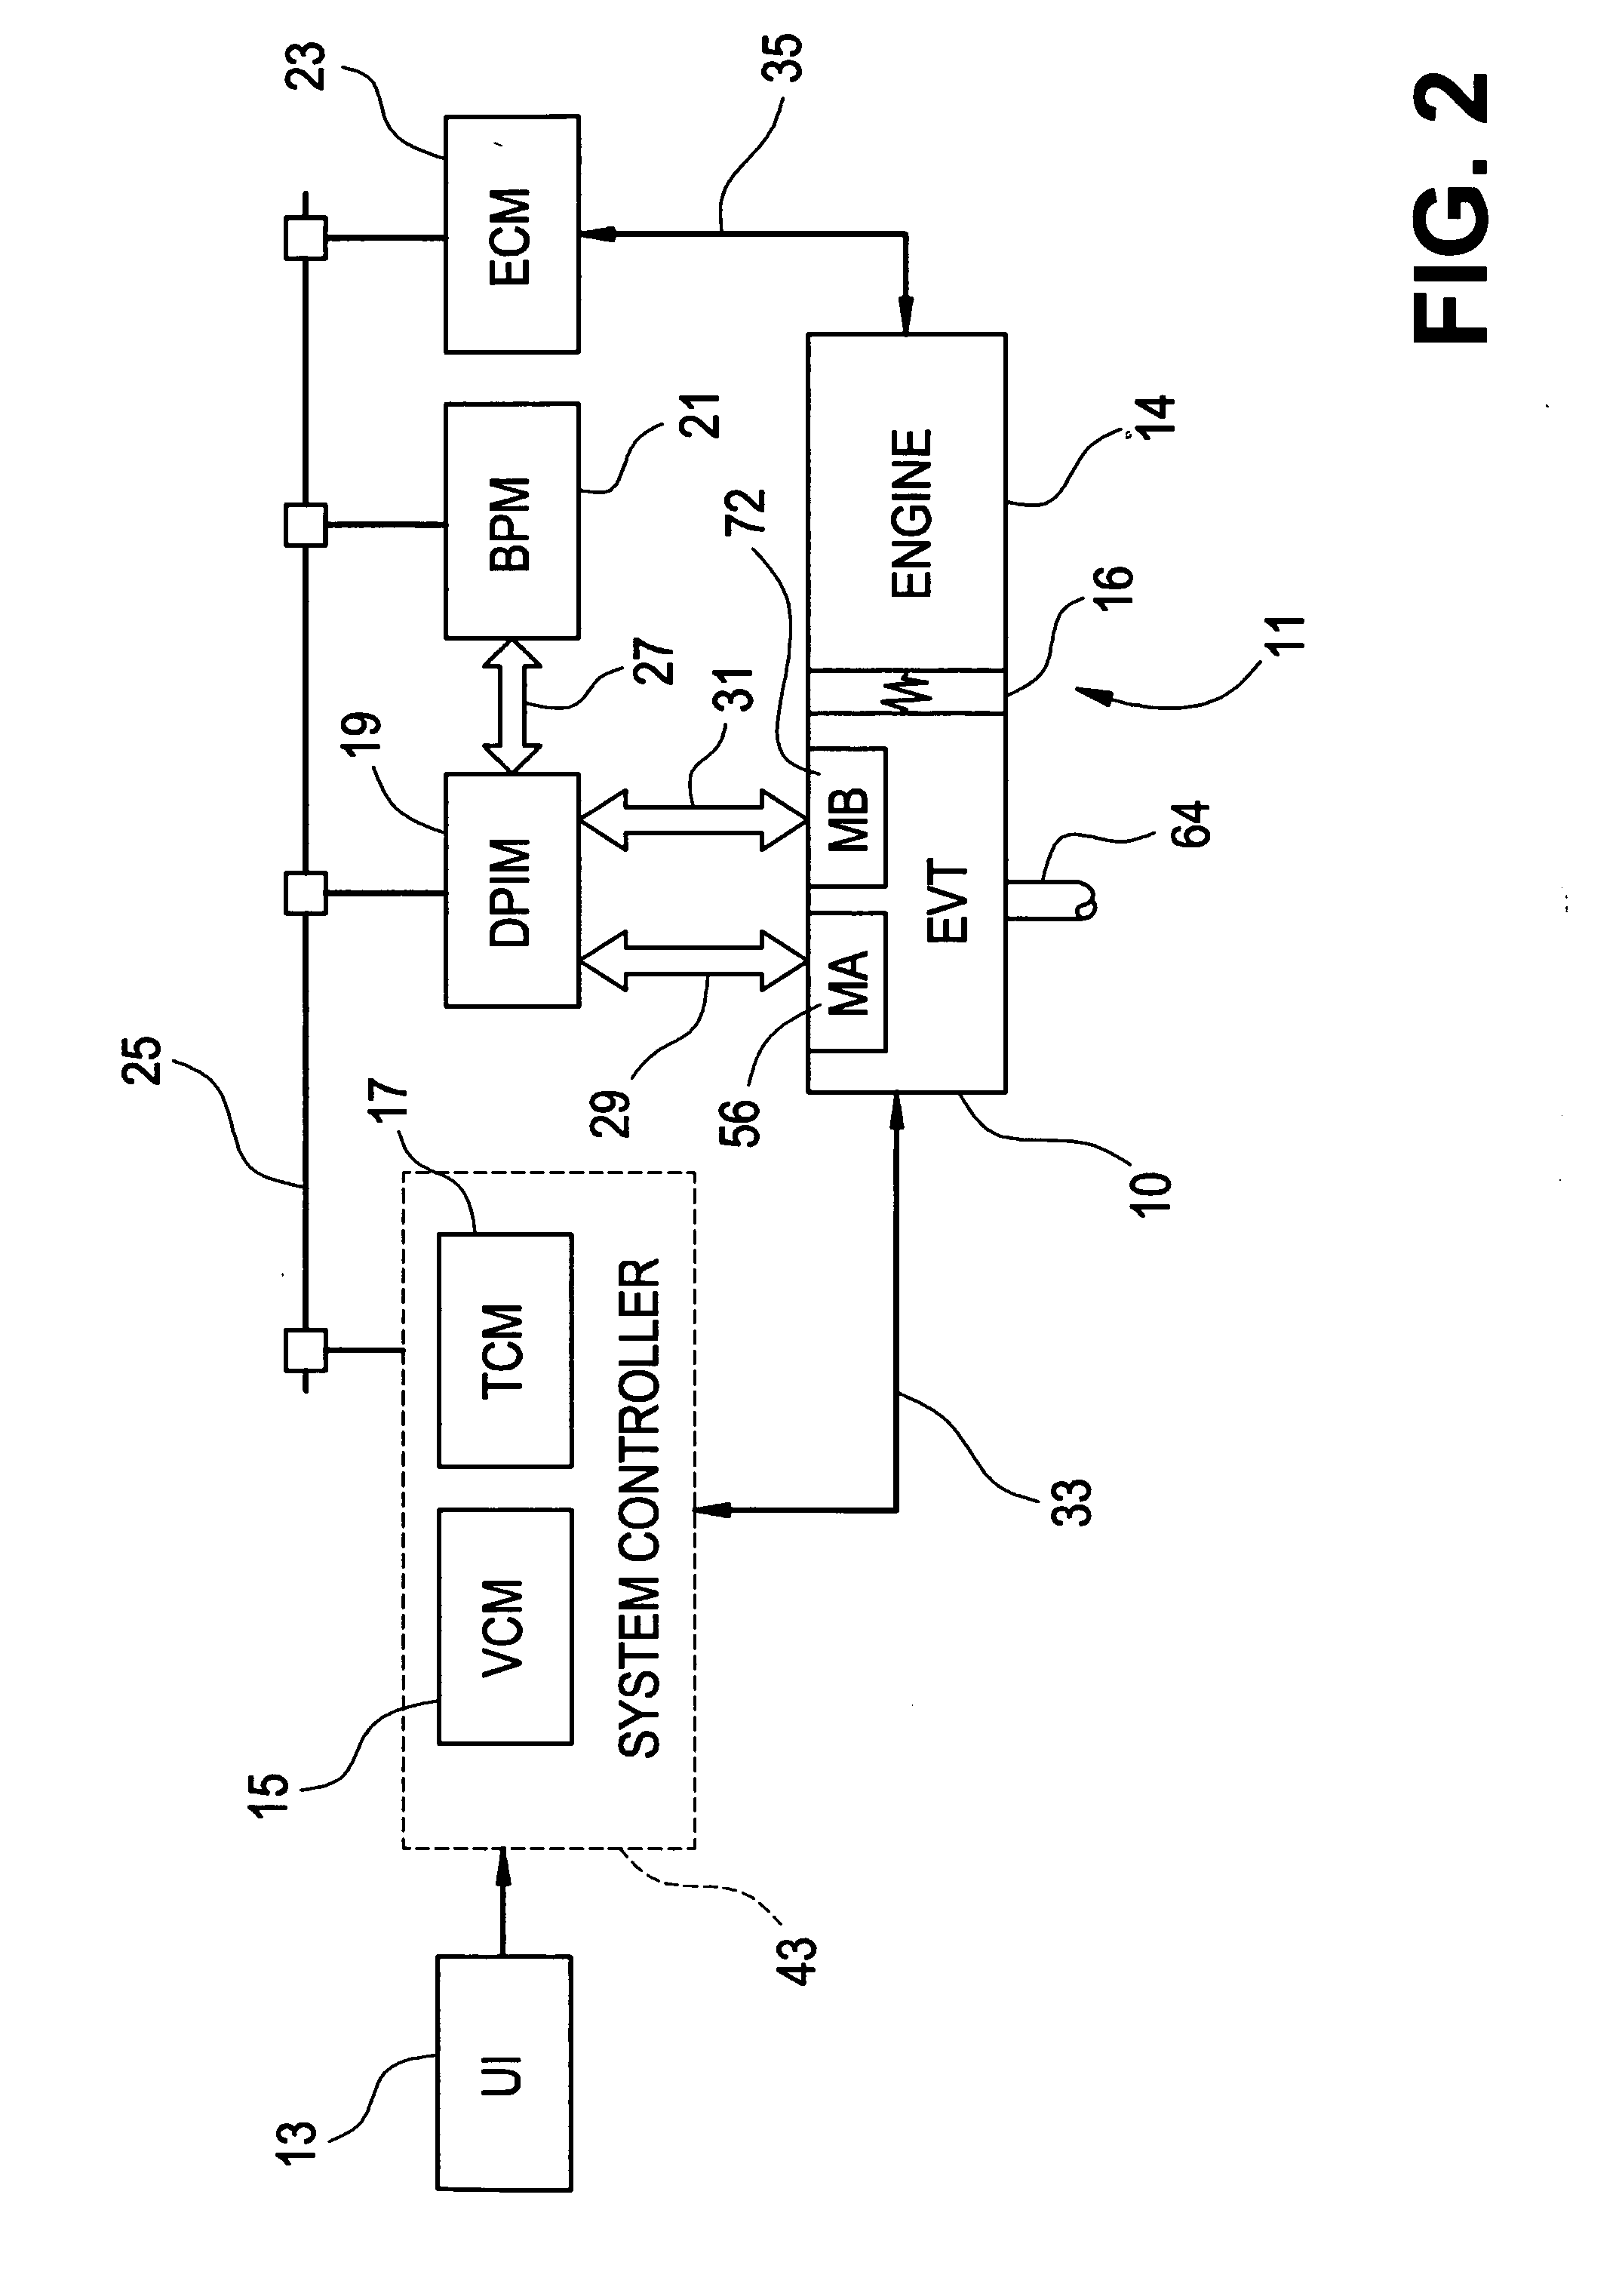 Method for dynamically determining peak output torque in an electrically variable transmission